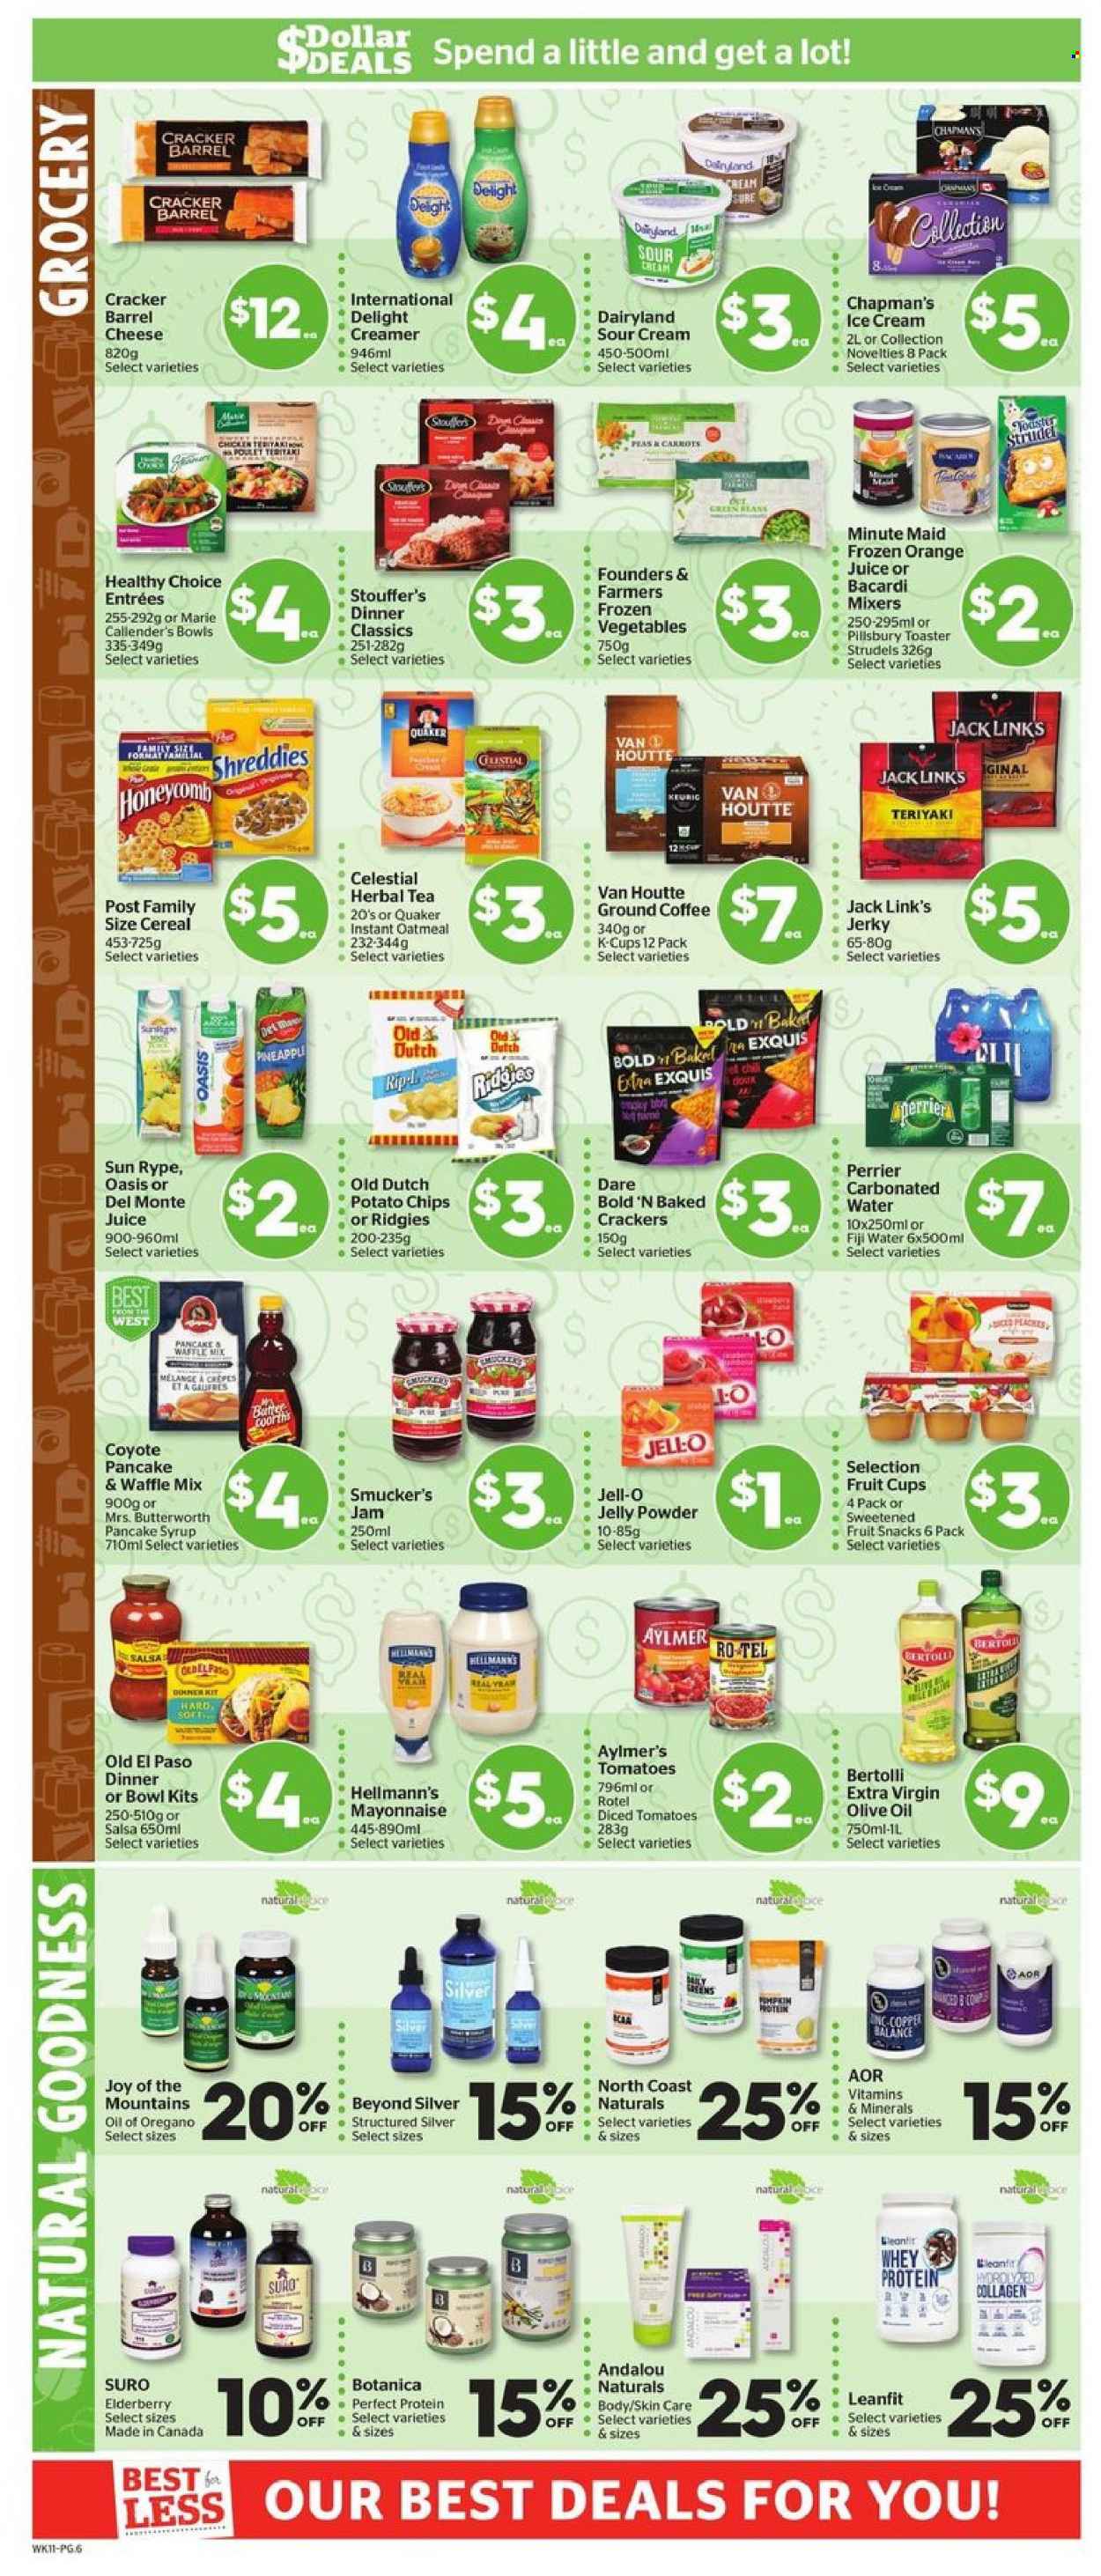 thumbnail - Calgary Co-op Flyer - January 13, 2022 - January 19, 2022 - Sales products - strudel, Old El Paso, carrots, tomatoes, fruit cup, Pillsbury, Quaker, Healthy Choice, Marie Callender's, Bertolli, jerky, cheese, sour cream, creamer, mayonnaise, Hellmann’s, ice cream, frozen vegetables, Stouffer's, jelly, crackers, fruit snack, potato chips, Jack Link's, oatmeal, Jell-O, cereals, salsa, extra virgin olive oil, olive oil, oil, fruit jam, pancake syrup, syrup, orange juice, juice, Perrier, fruit punch, tea, herbal tea, coffee, ground coffee, coffee capsules, K-Cups, Keurig, Bacardi, Joy, Sure, bowl, whey protein. Page 7.